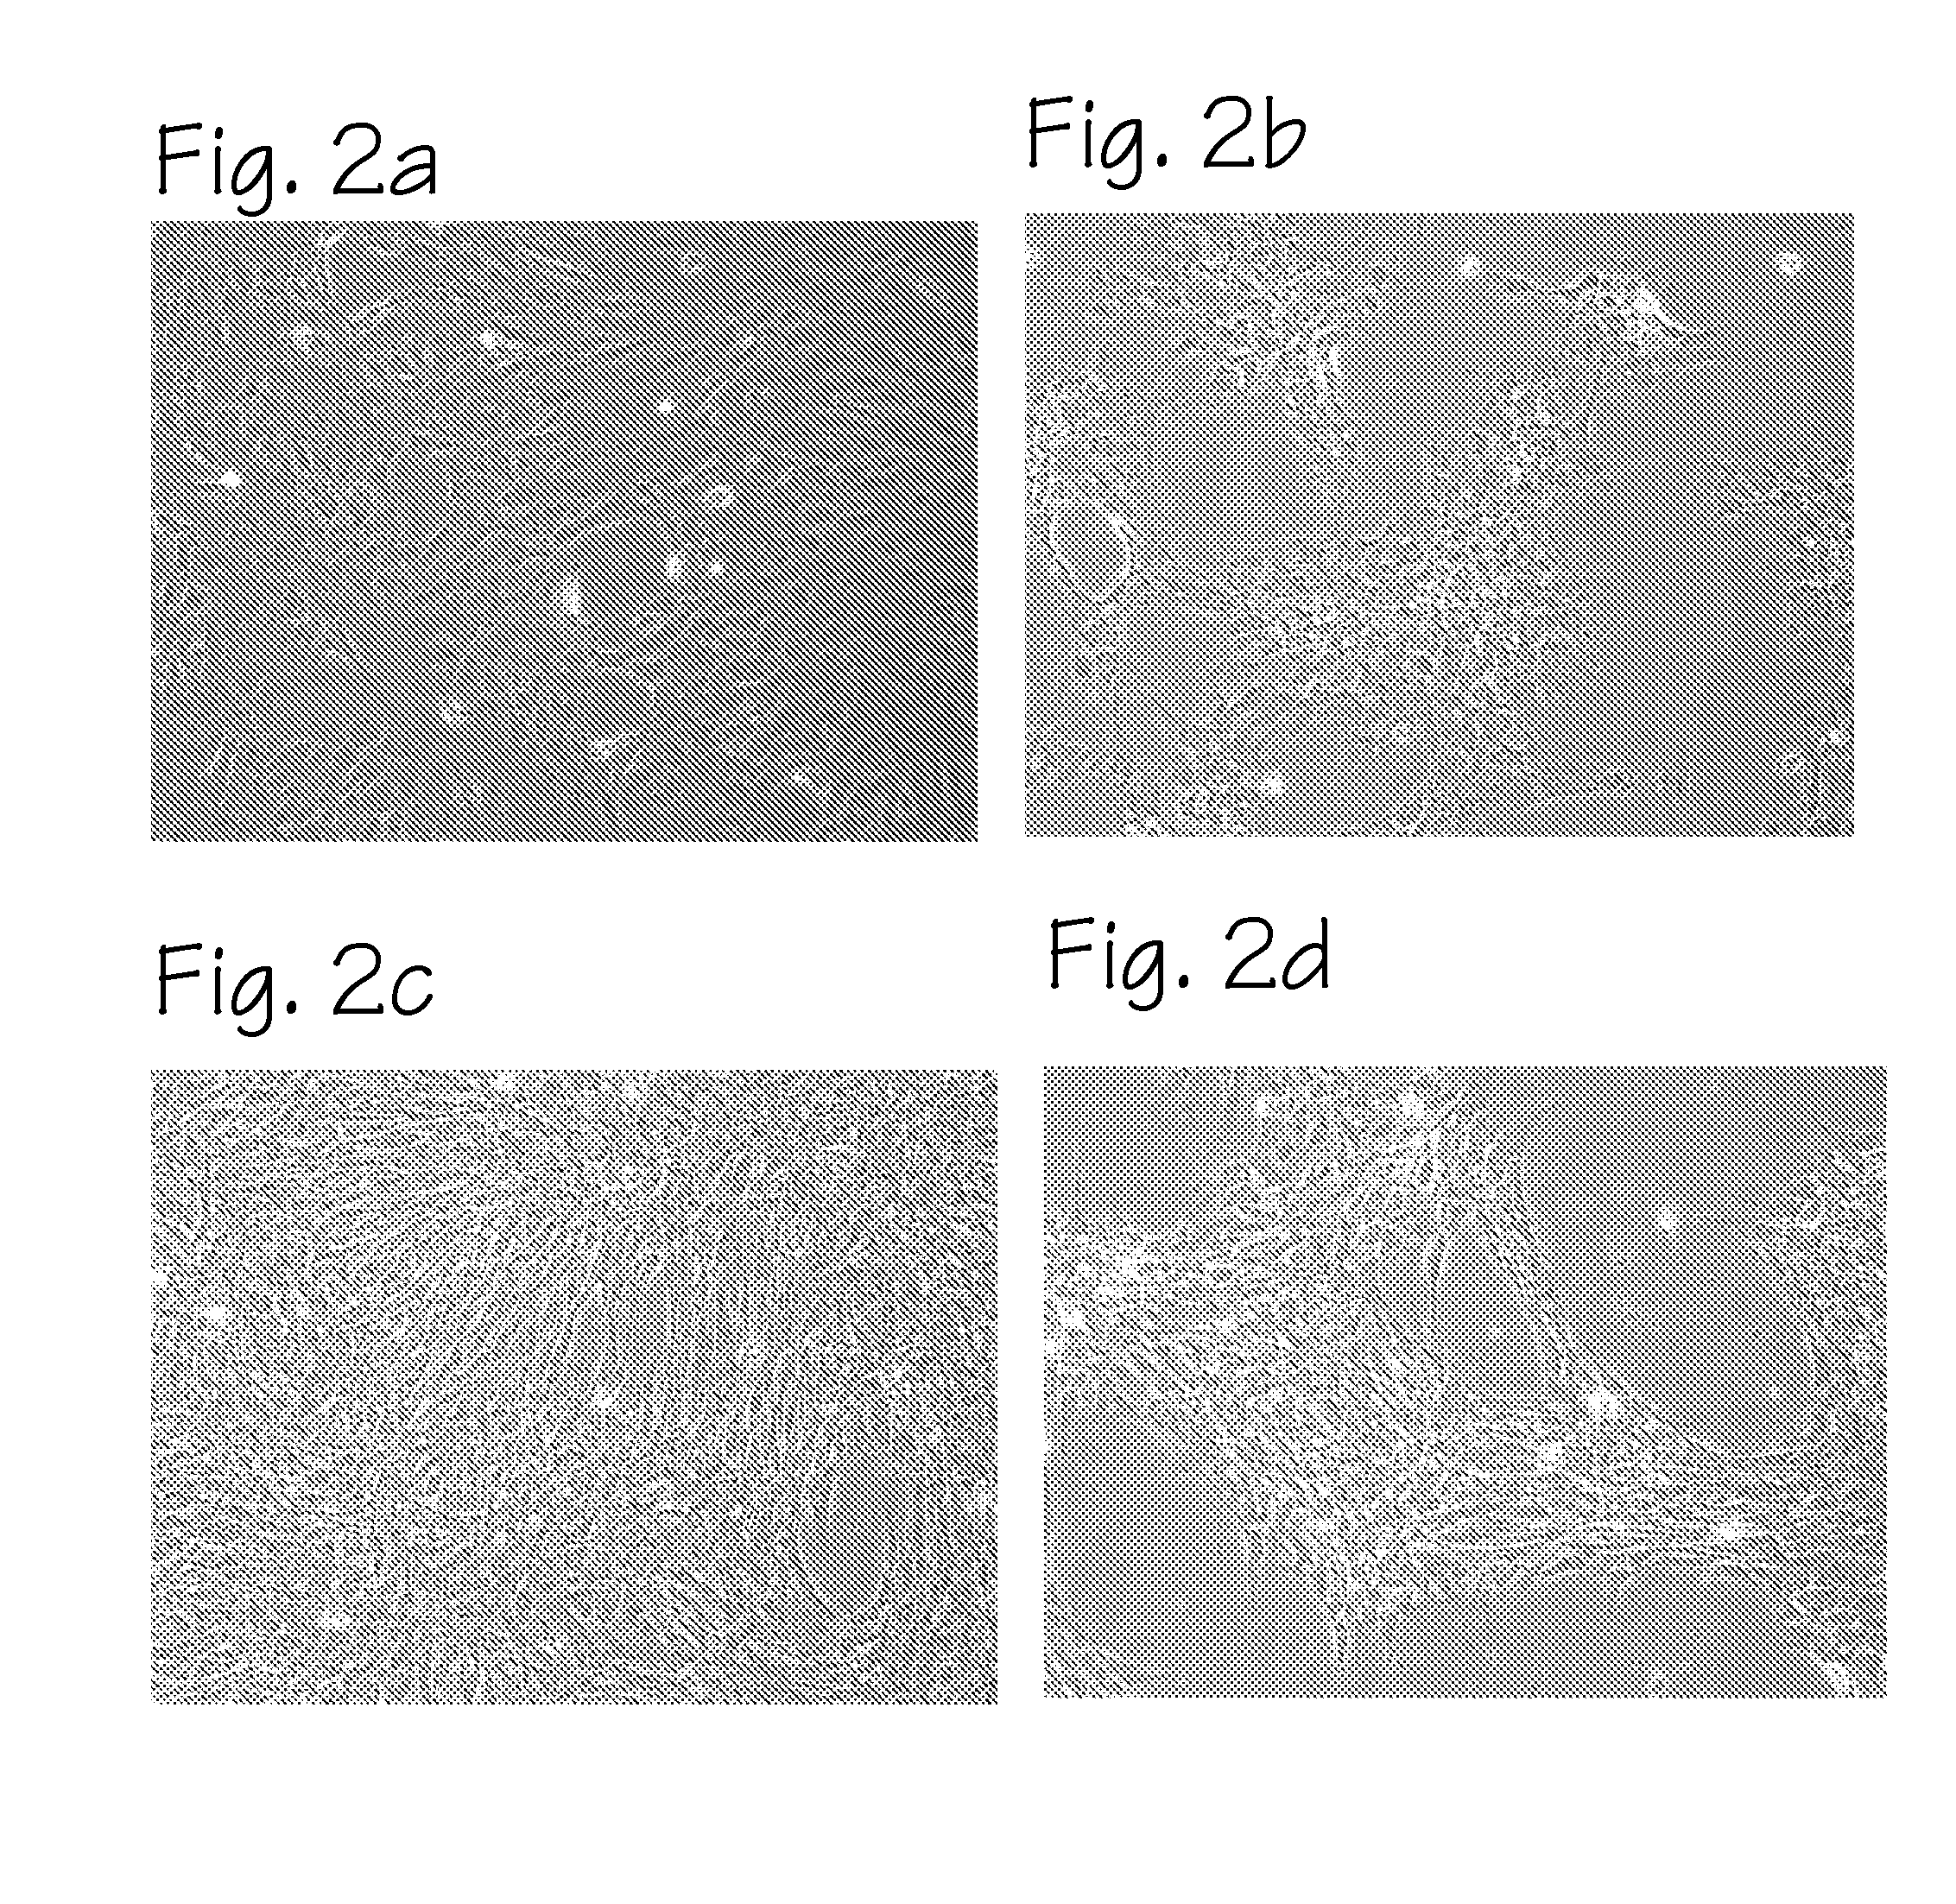 Method of preparing autologous cells and methods of use for therapy